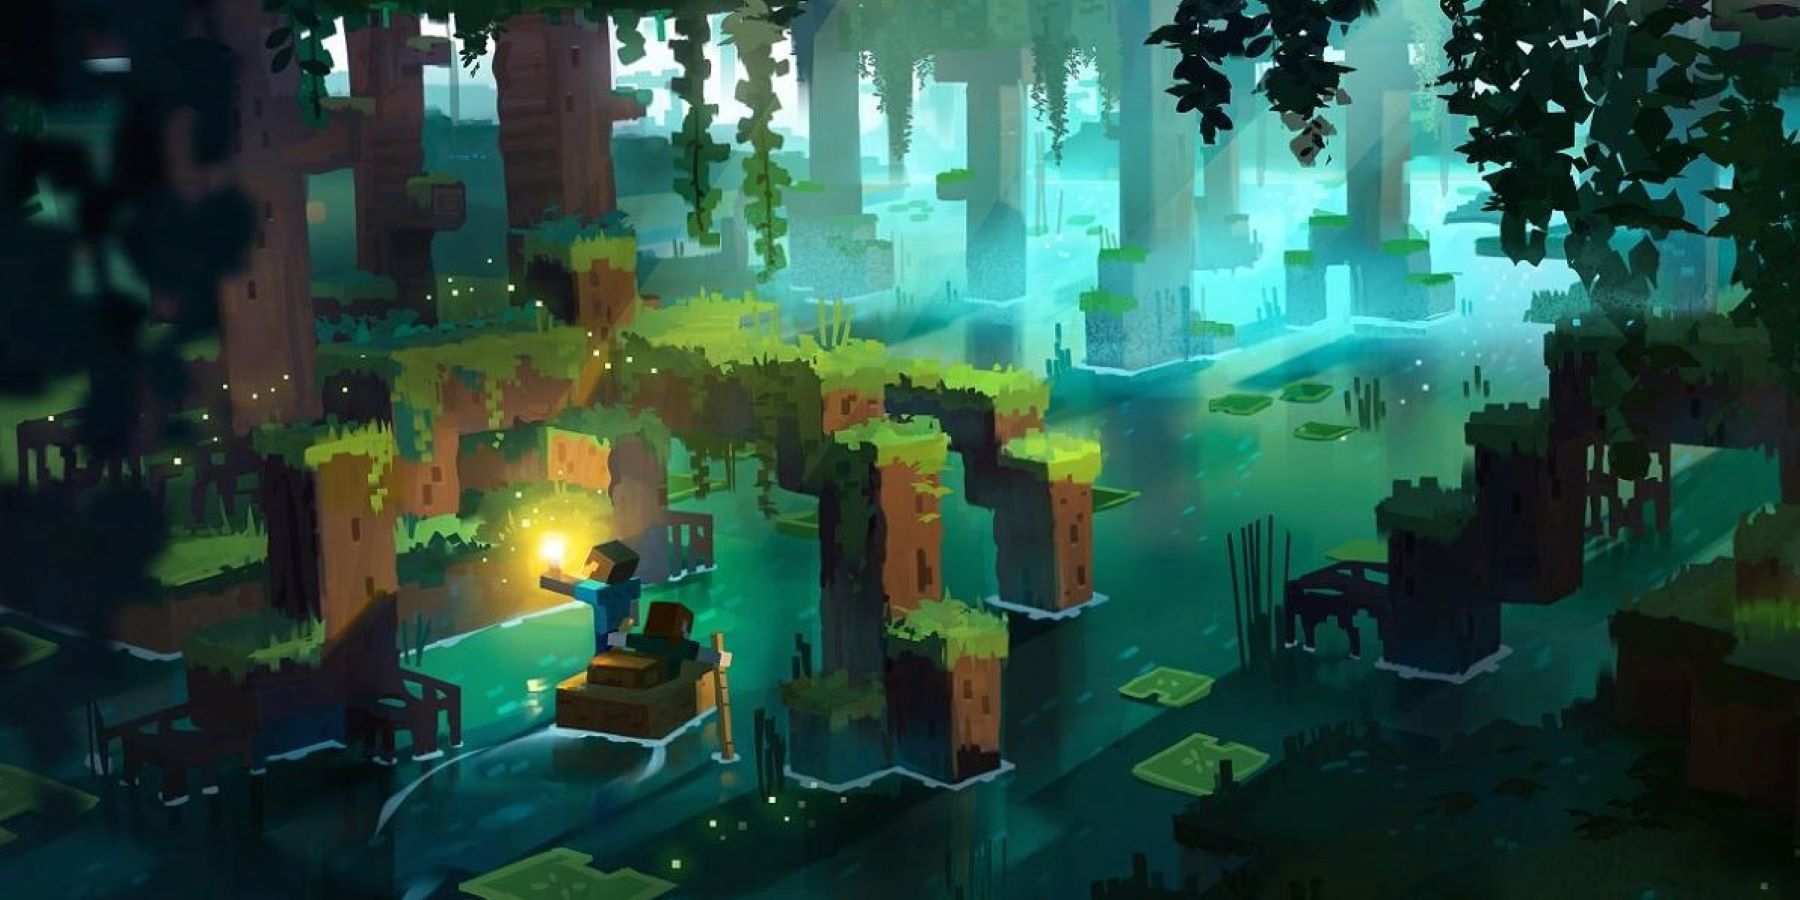 Concept art for a swamp in Minecraft's Wild Update, showing Steve and Alex traveling under some mangrove trees and fireflies in a boat